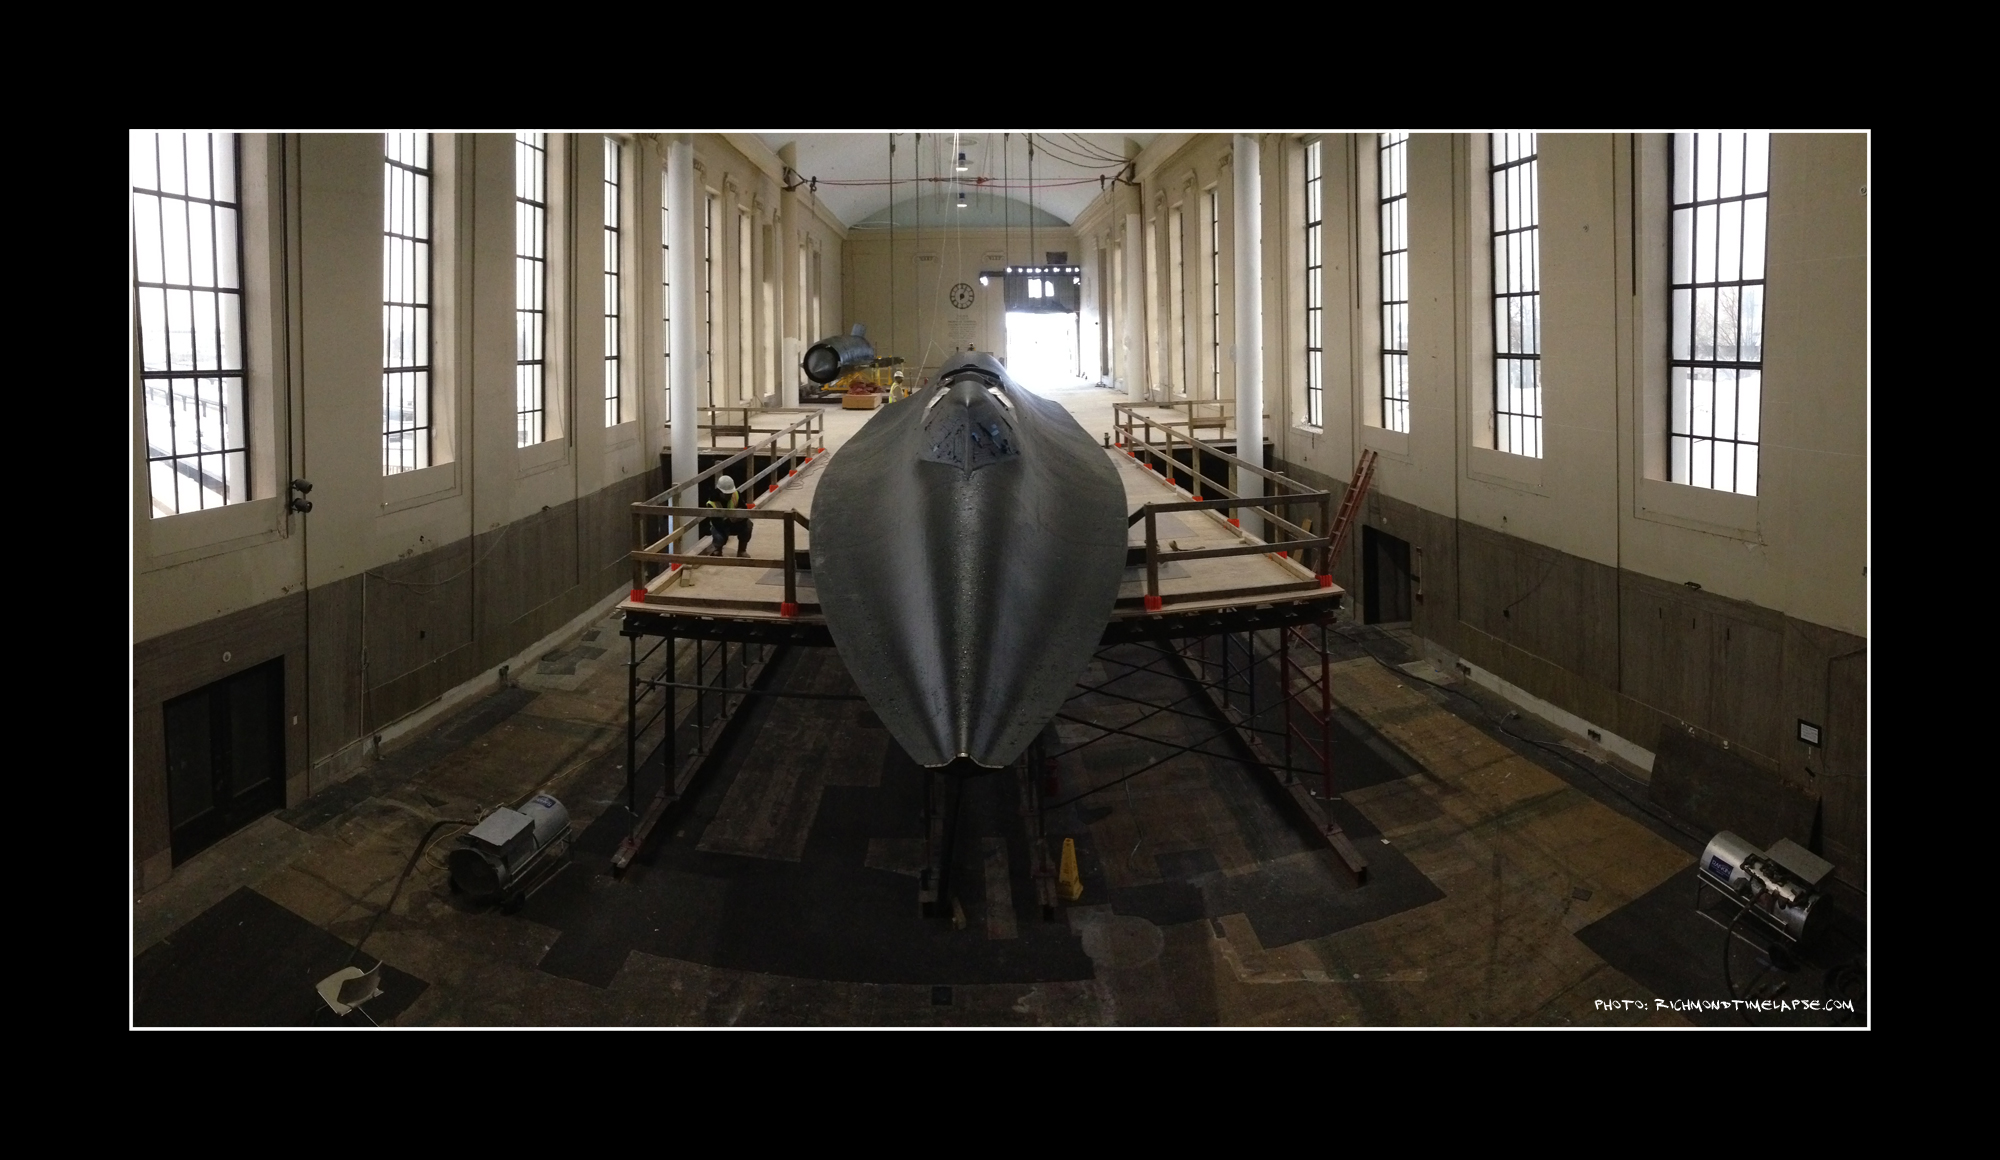 SR-71 Spy Plane moved to Science Museum of VA